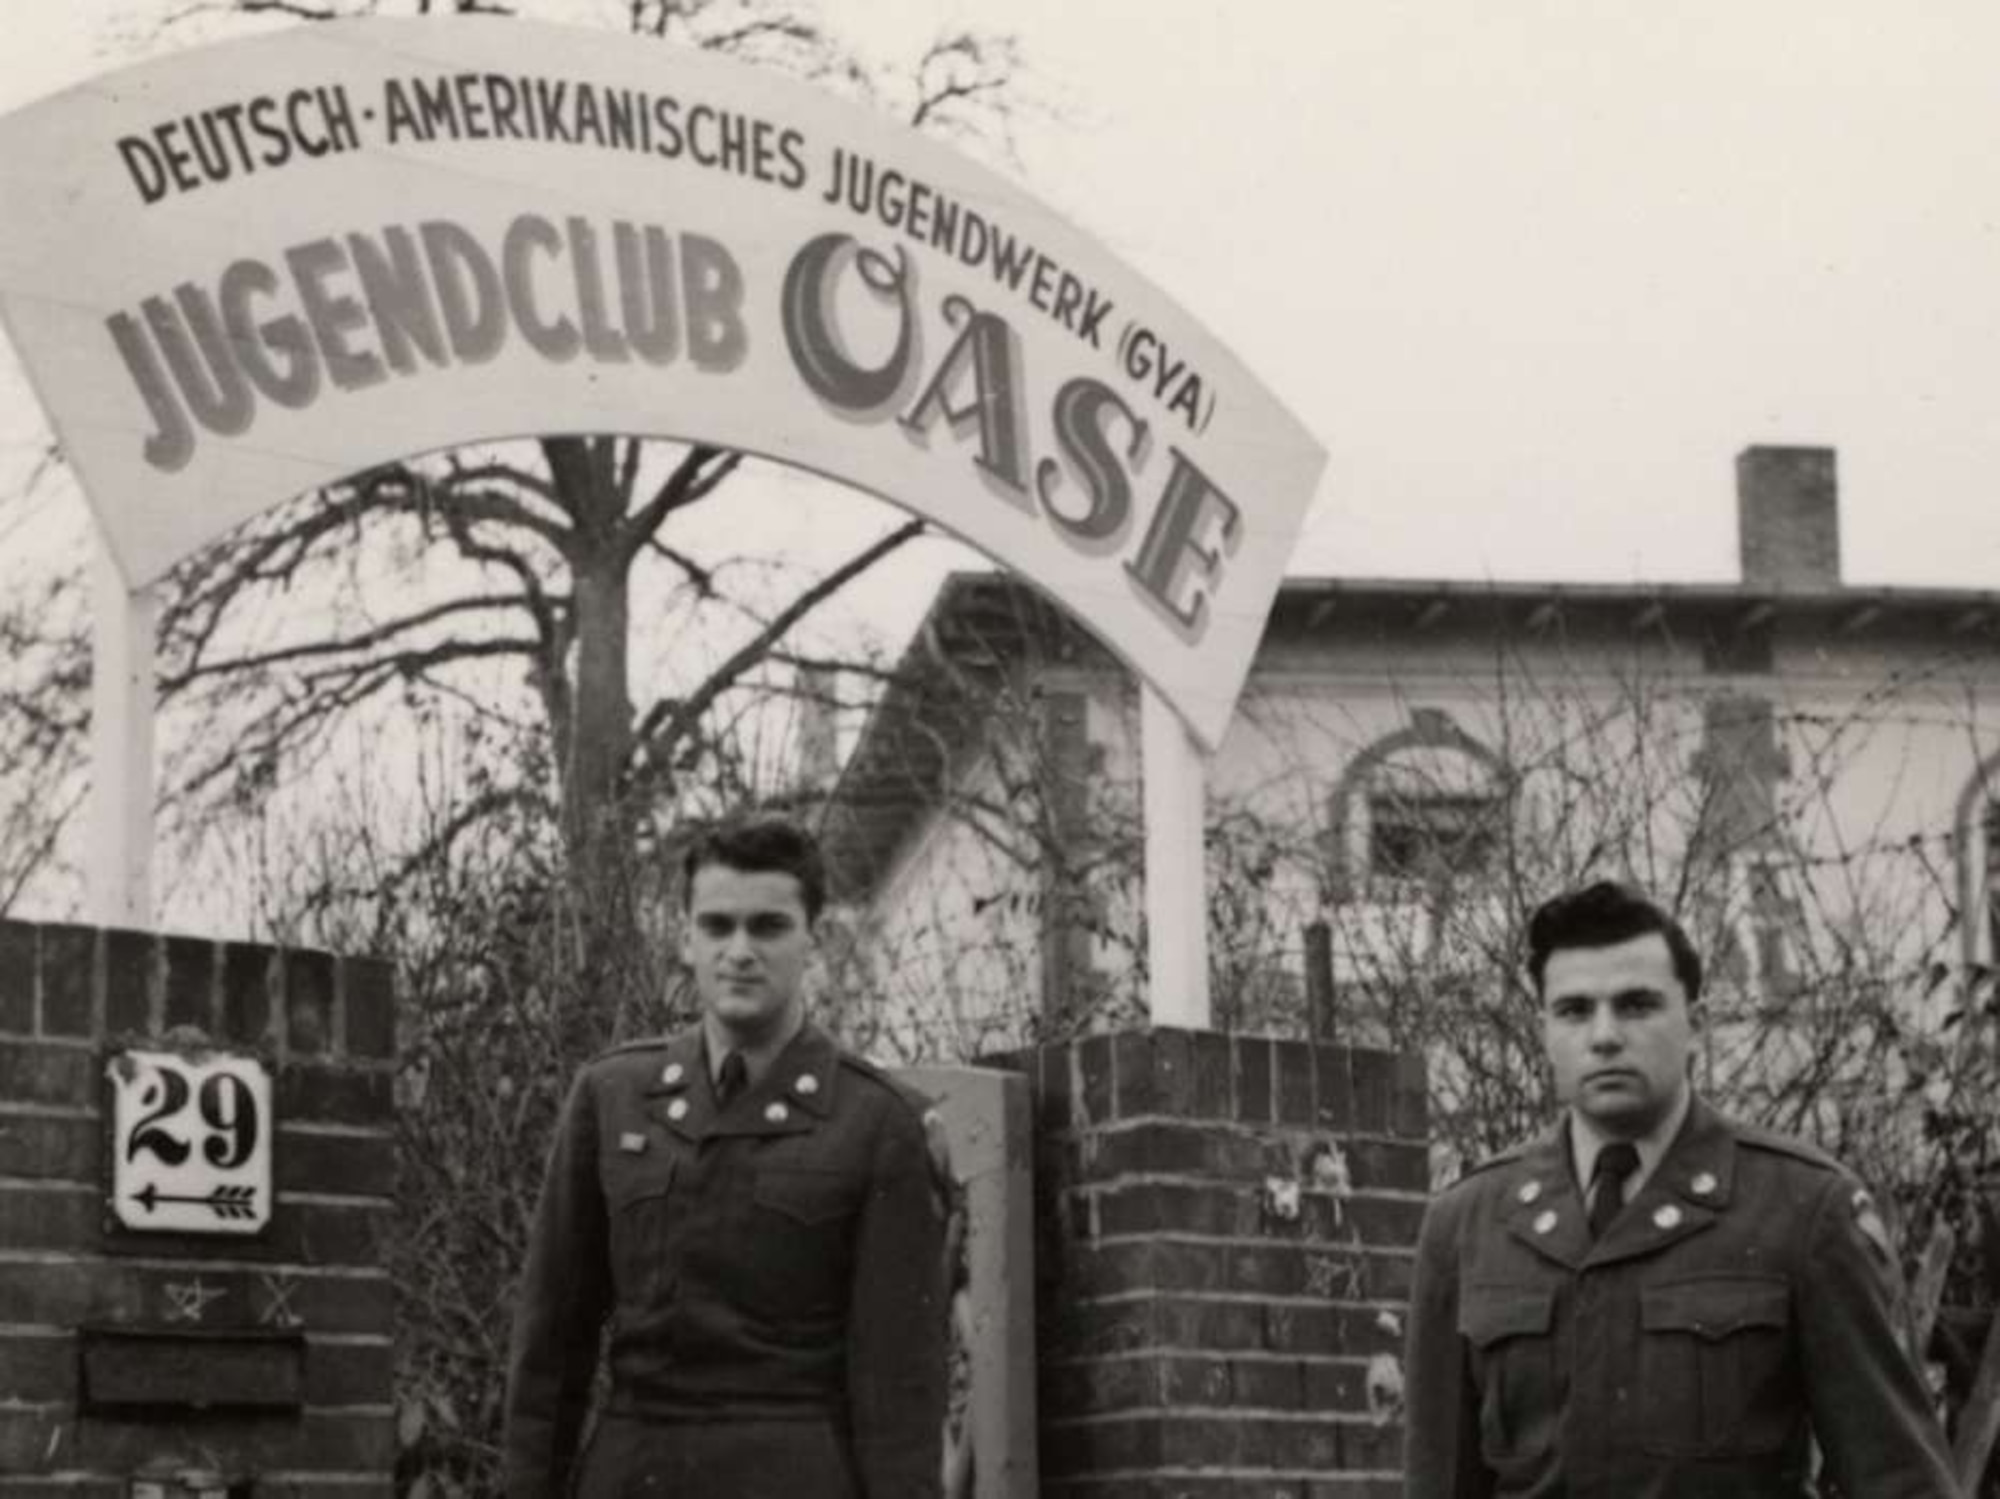 Bob Behr, right, and another American Soldier pose outside of the German-American Youth Club in Germany. Following his liberation in 1945, Behr, a Holocaust survivor, would eventually immigrate to the U.S., where he enlisted in the Army, and later worked for the Air Force as a civilian in the intelligence field for more than 35 years. (Photo courtesy/U.S. Holocaust Memorial Museum)